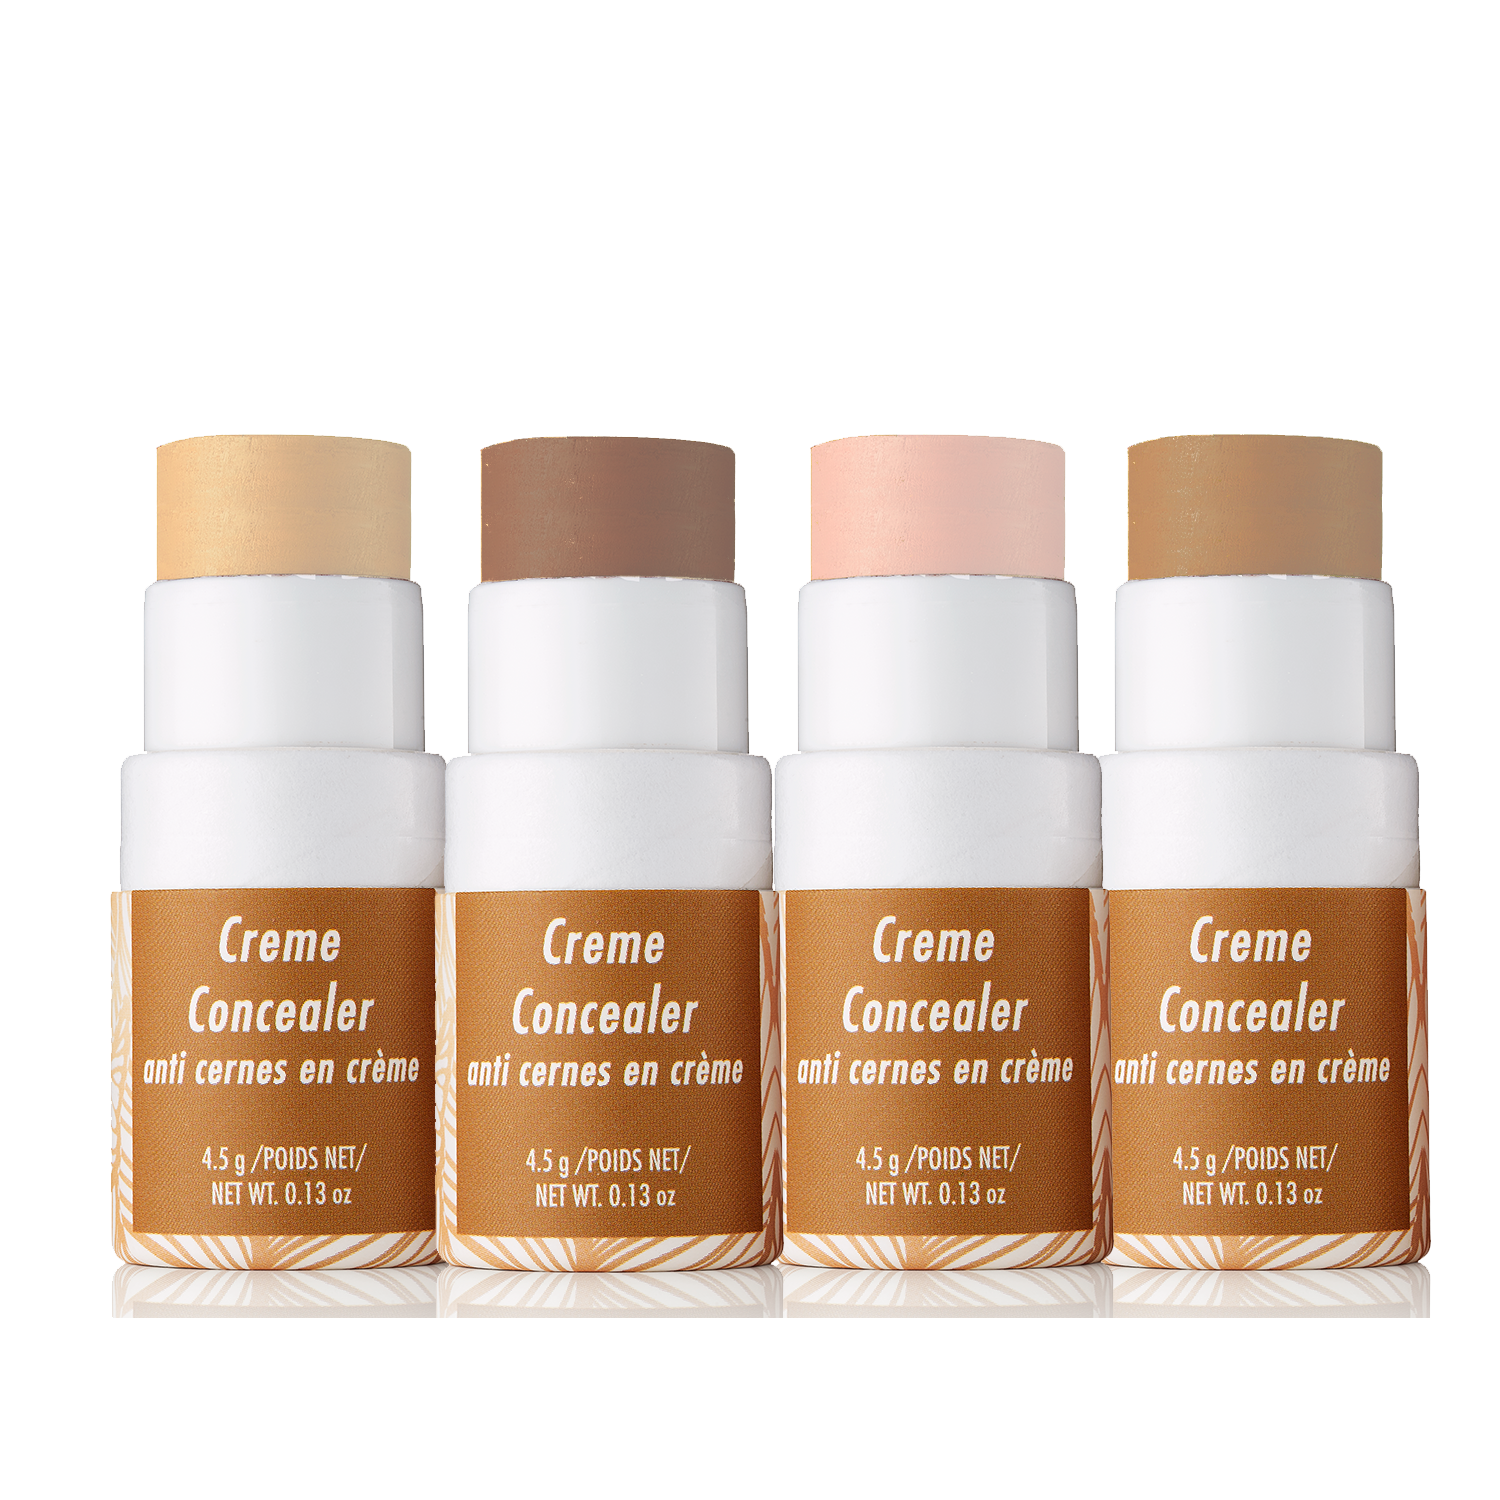 Concealer Sticks :: Natural and :: Non-toxic makeup - Jane Beauty